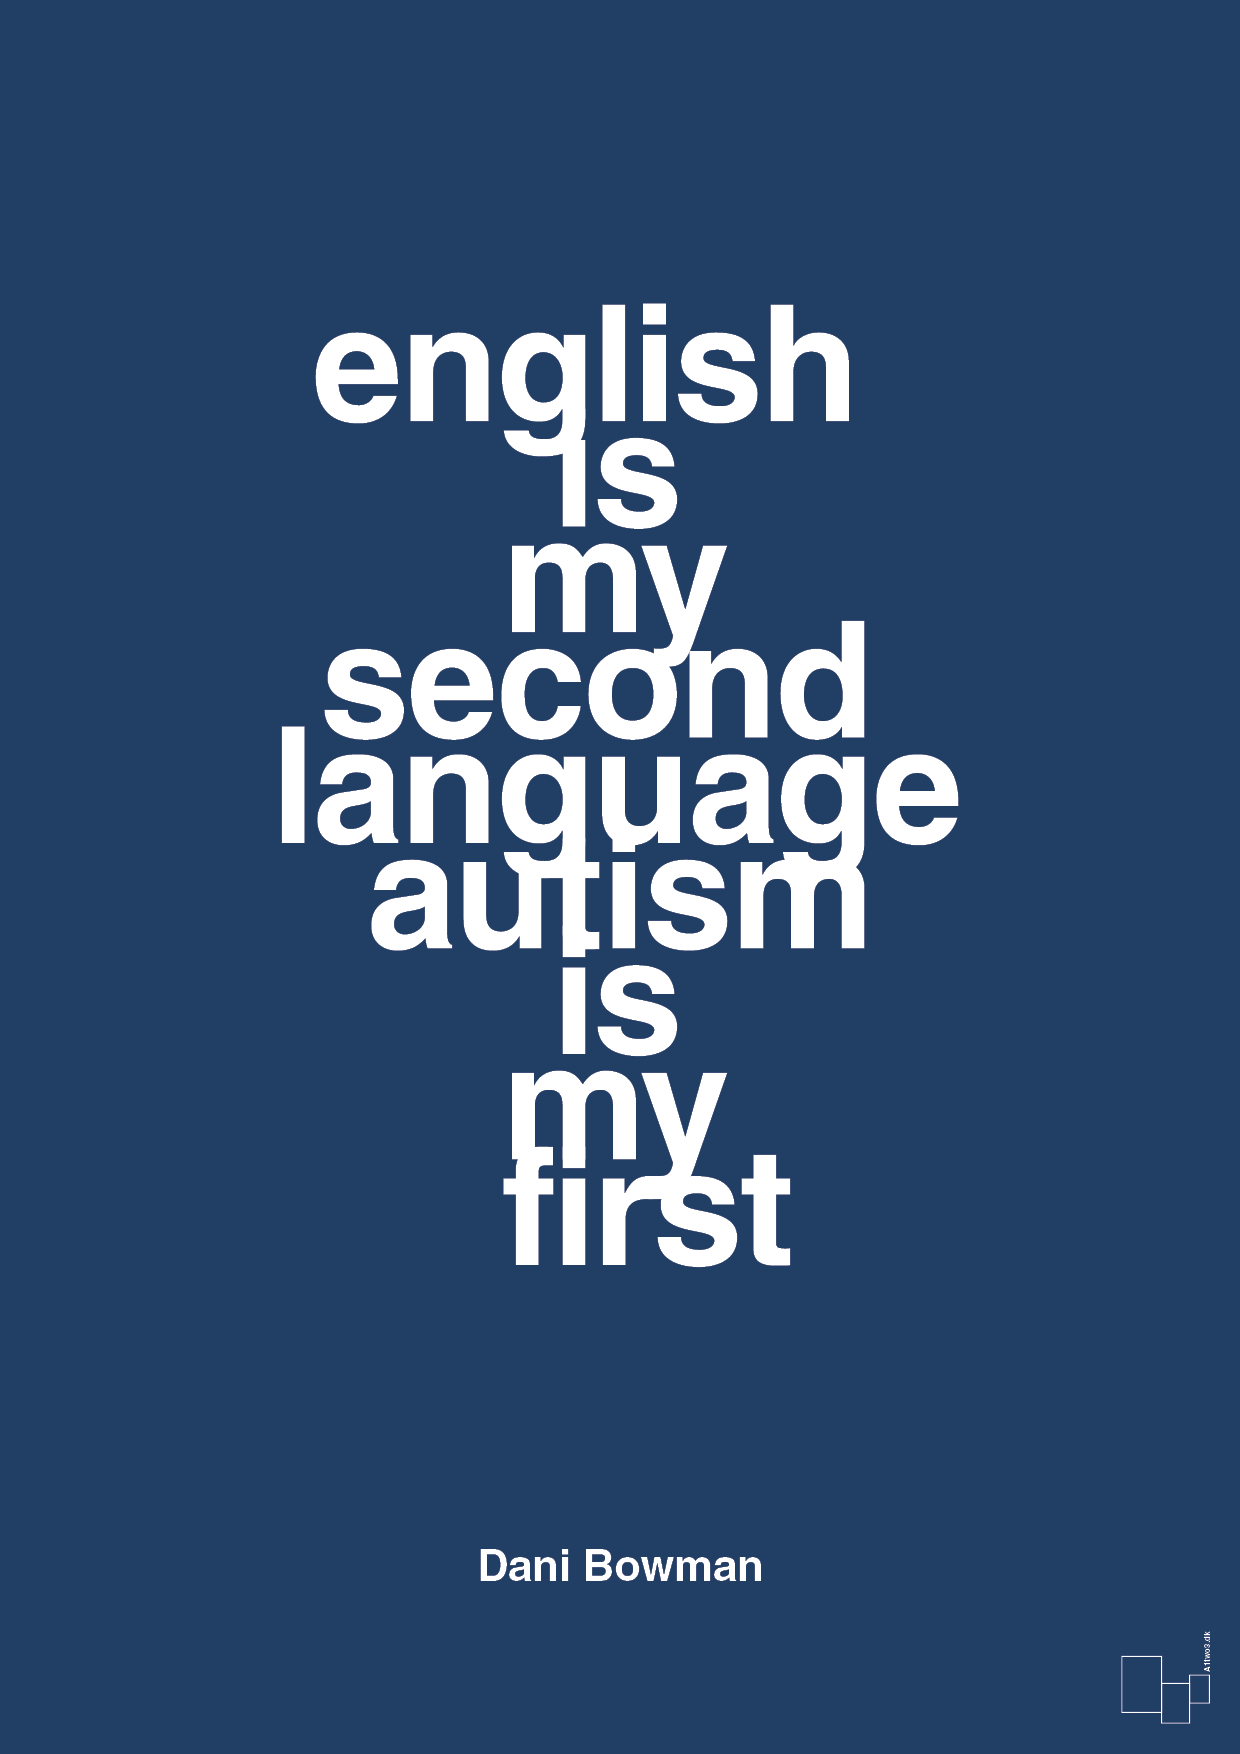 english is my second language autism is my first - Plakat med Samfund i Lapis Blue